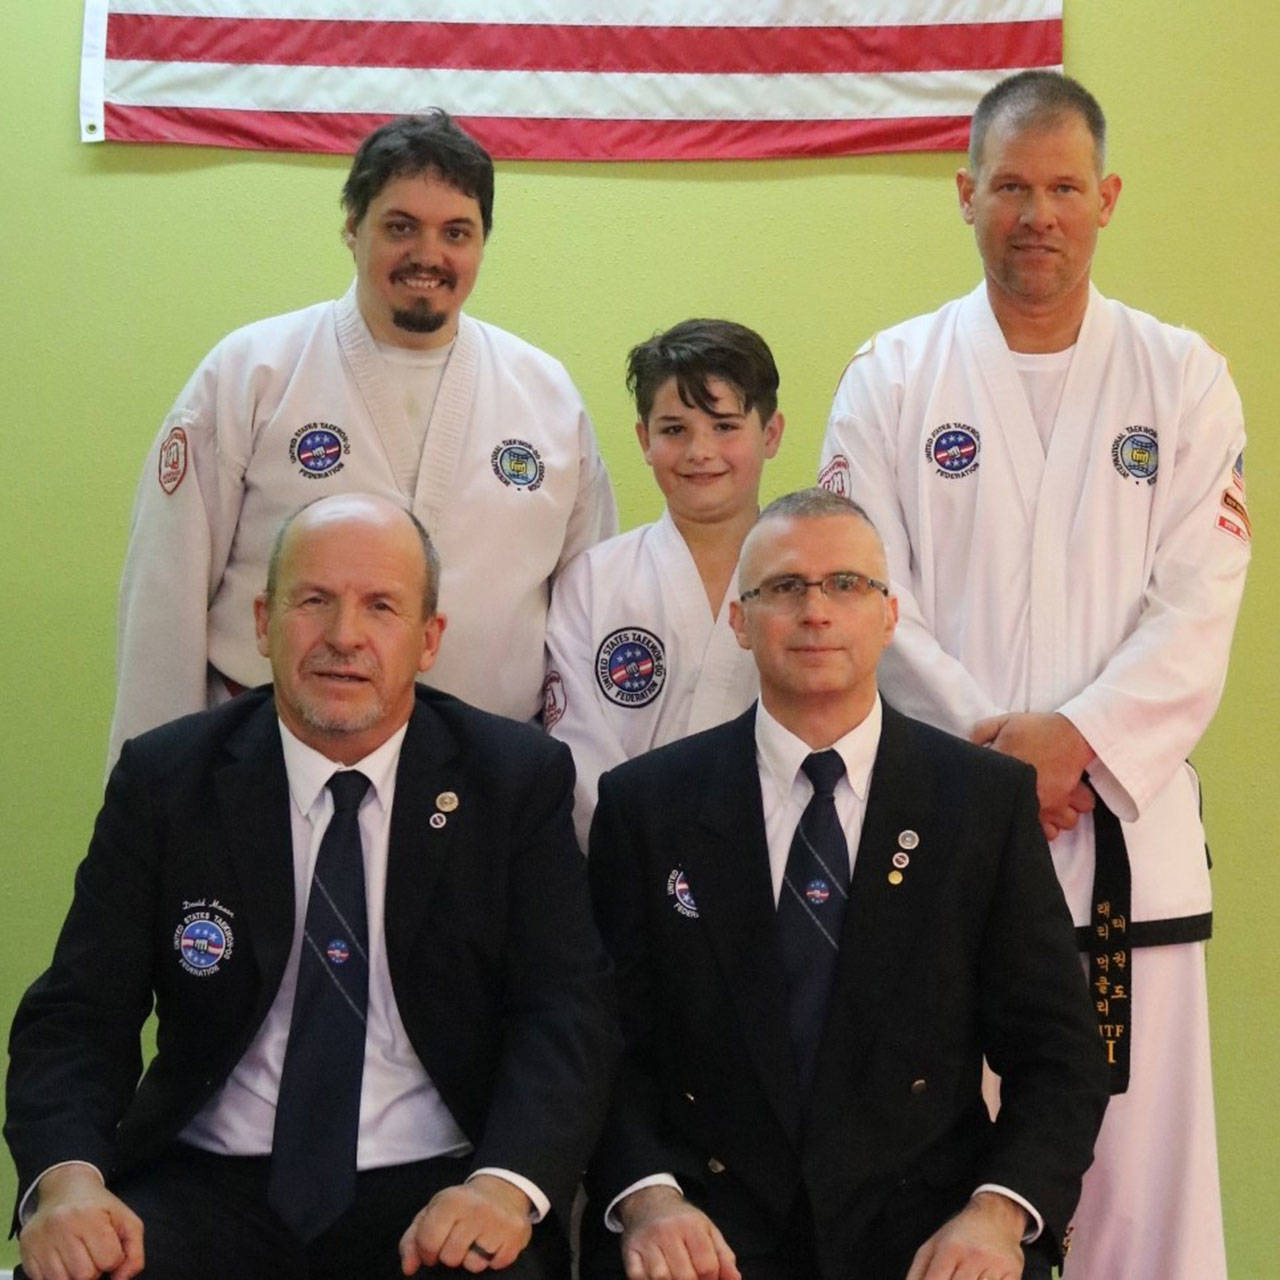 Three athletes from Bodystrong Academy earn black belts